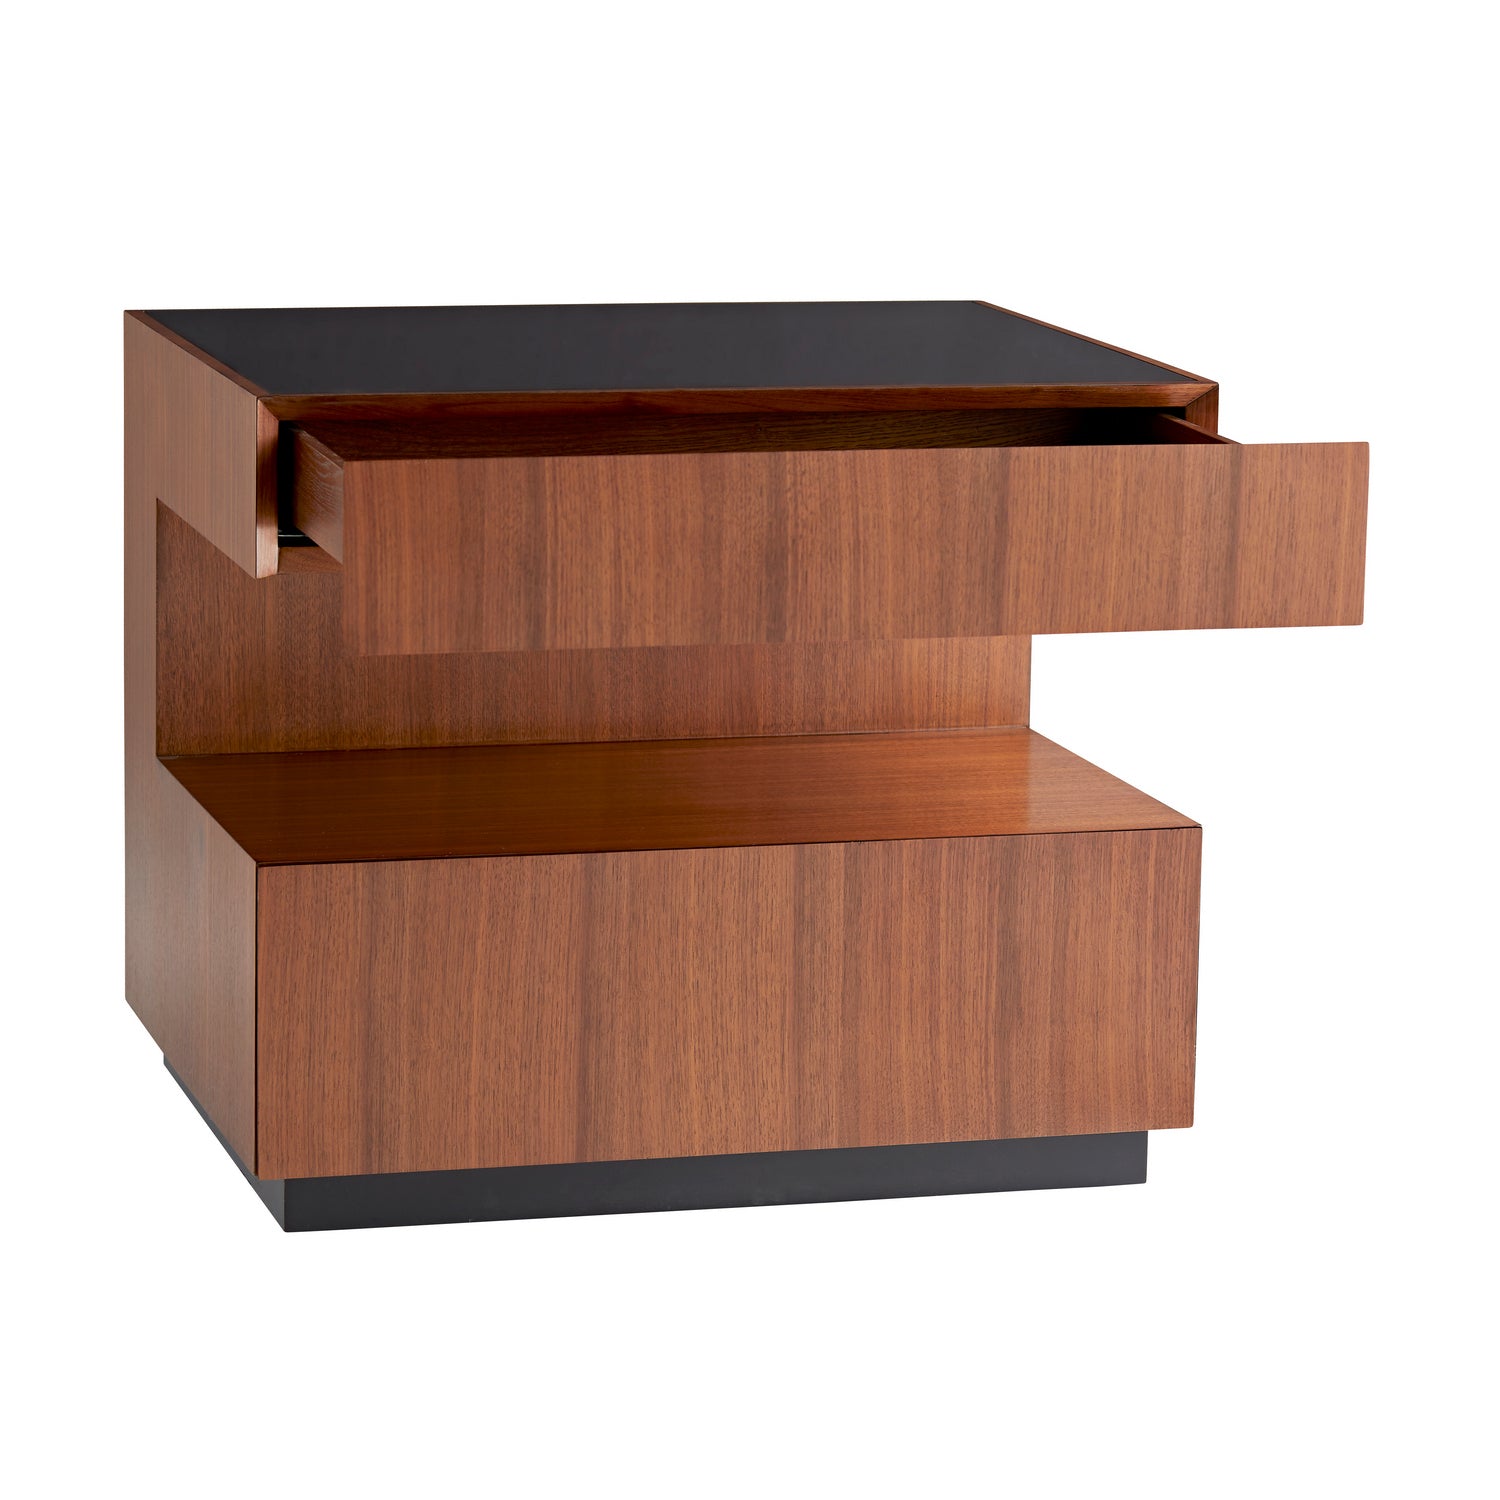 End Table from the Geron collection in Satin Walnut finish